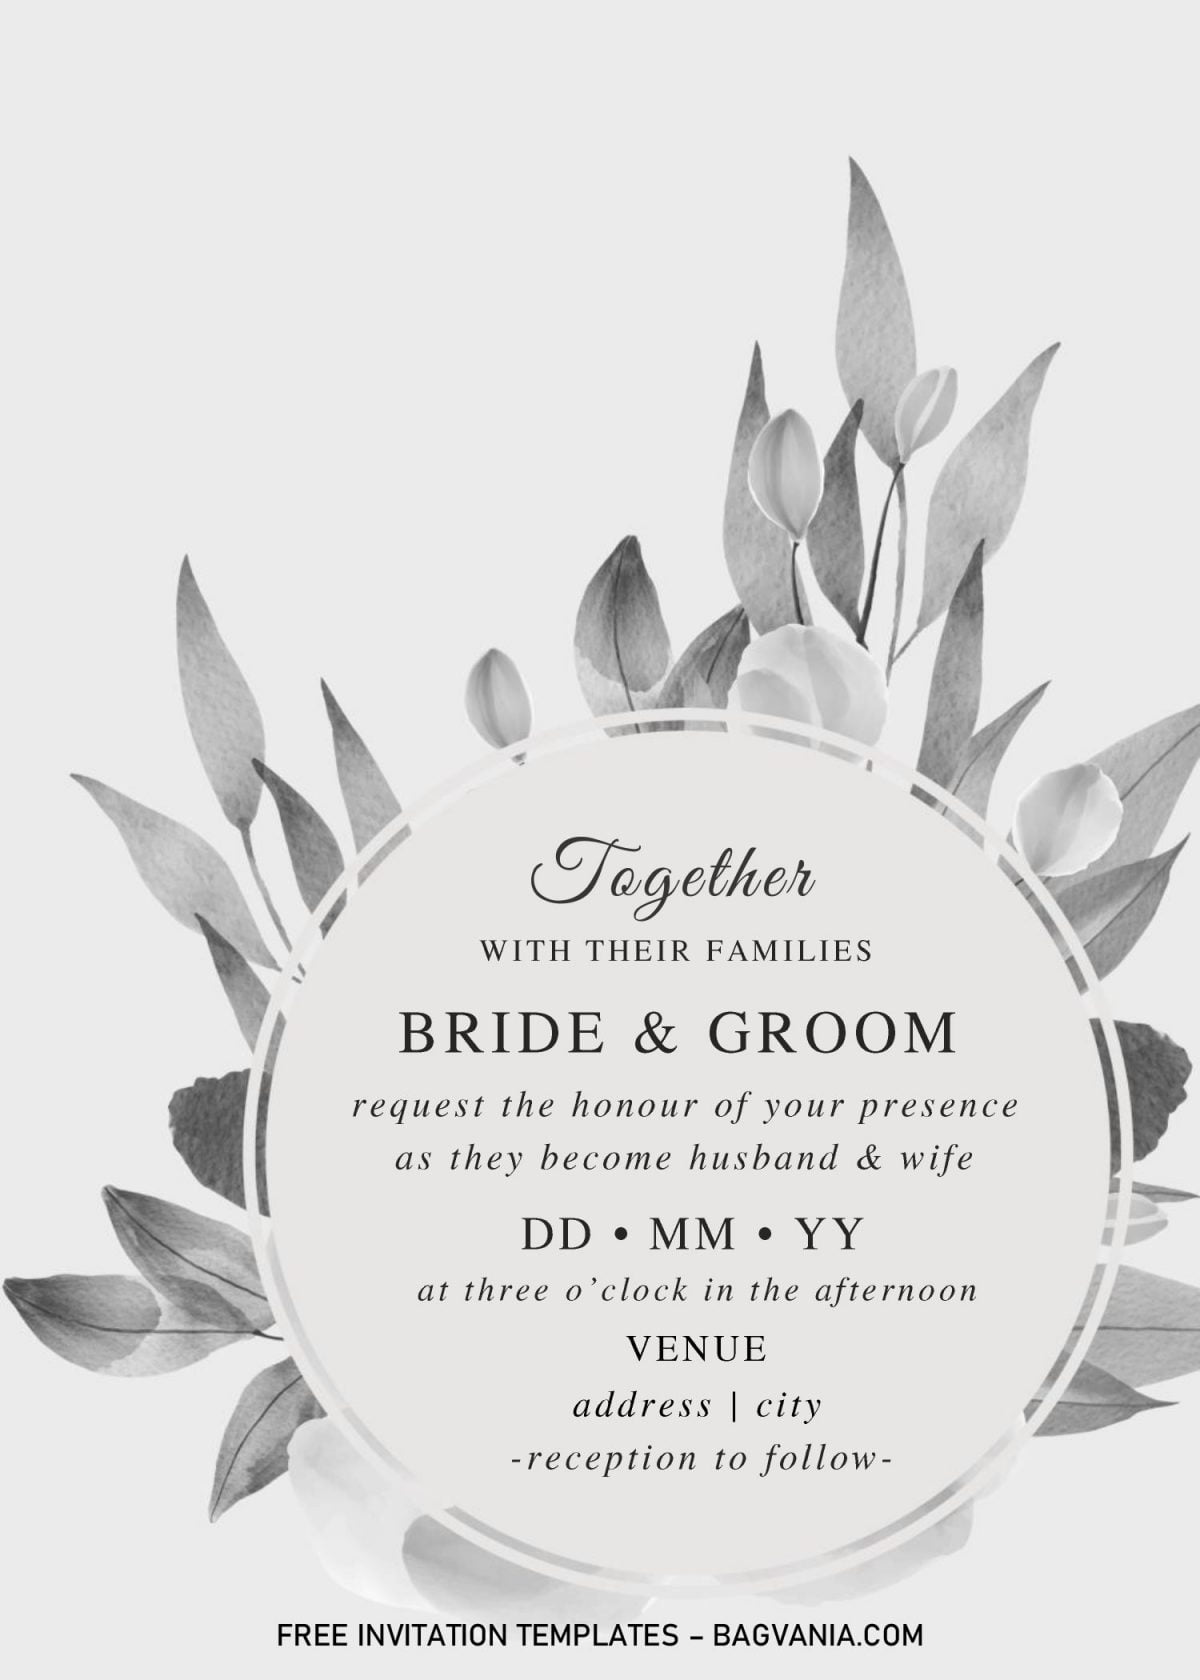 Black And White Wedding Invitation Templates - Editable With MS Word and has monochromatic design